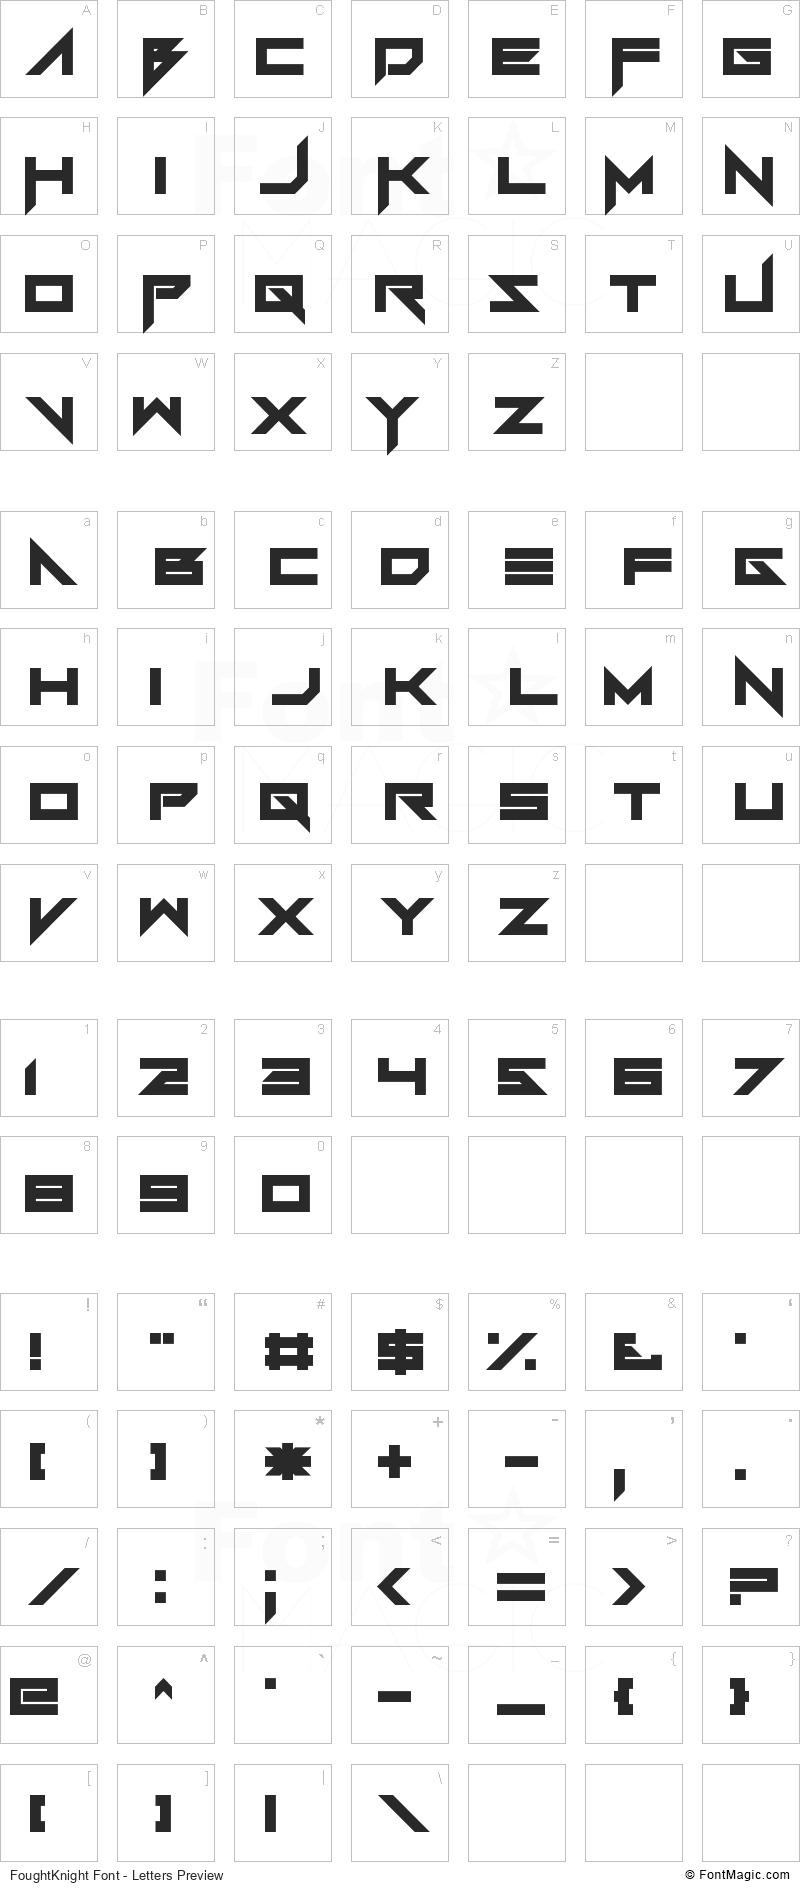 FoughtKnight Font - All Latters Preview Chart